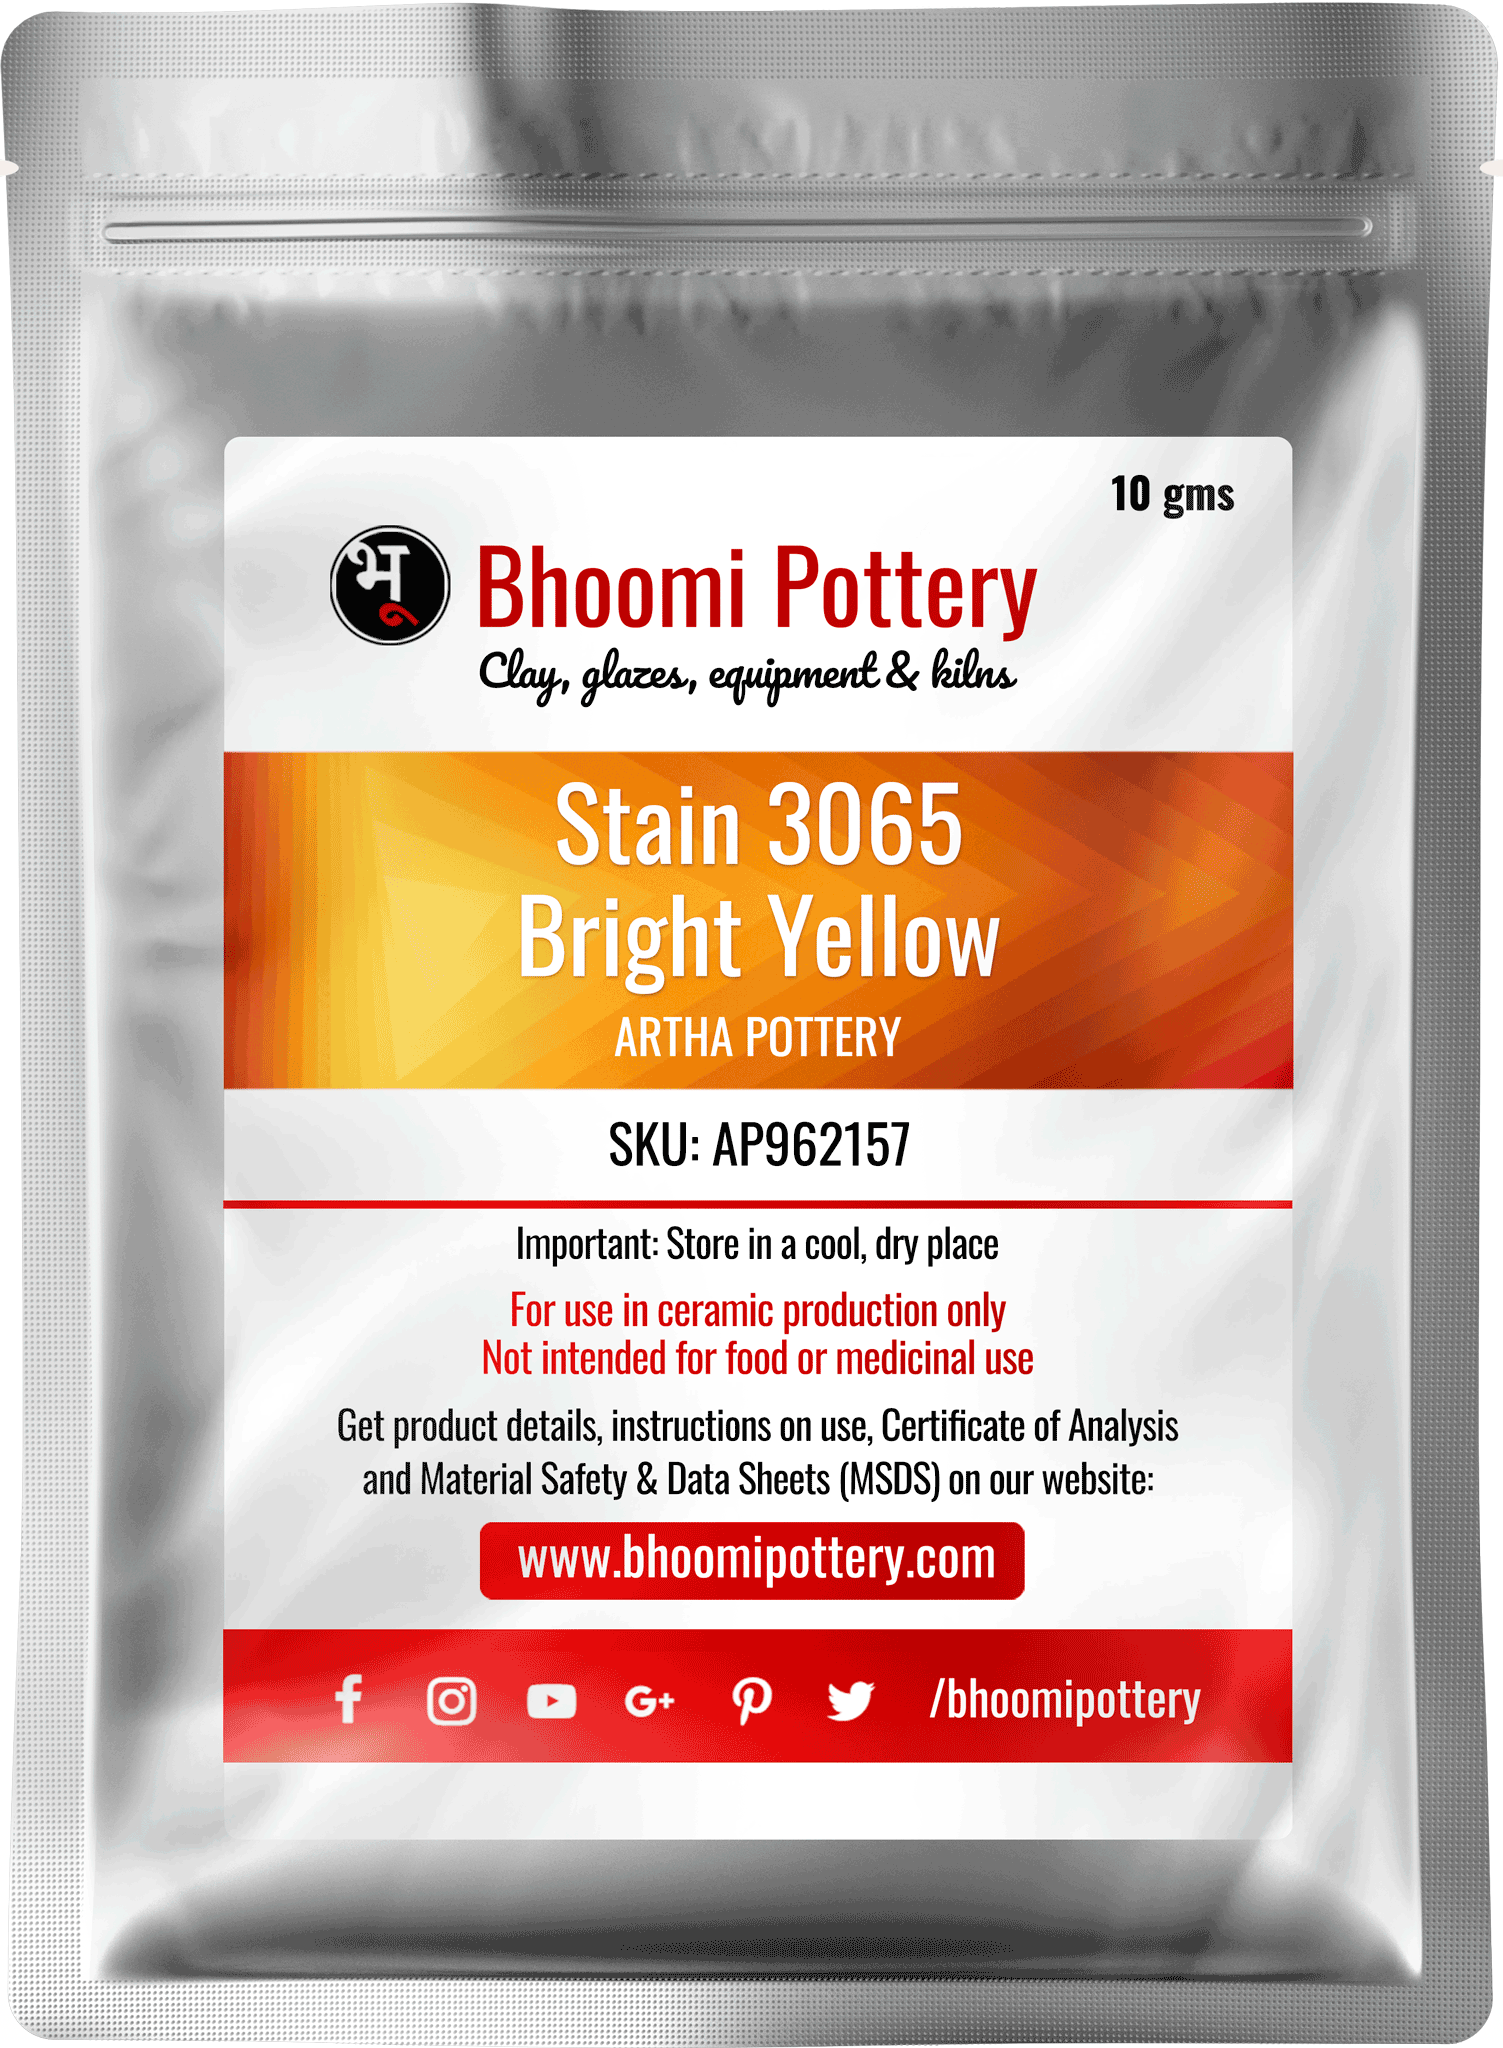 Artha Pottery Stain 3065 Bright Yellow 100 gms for sale in India - Bhoomi Pottery